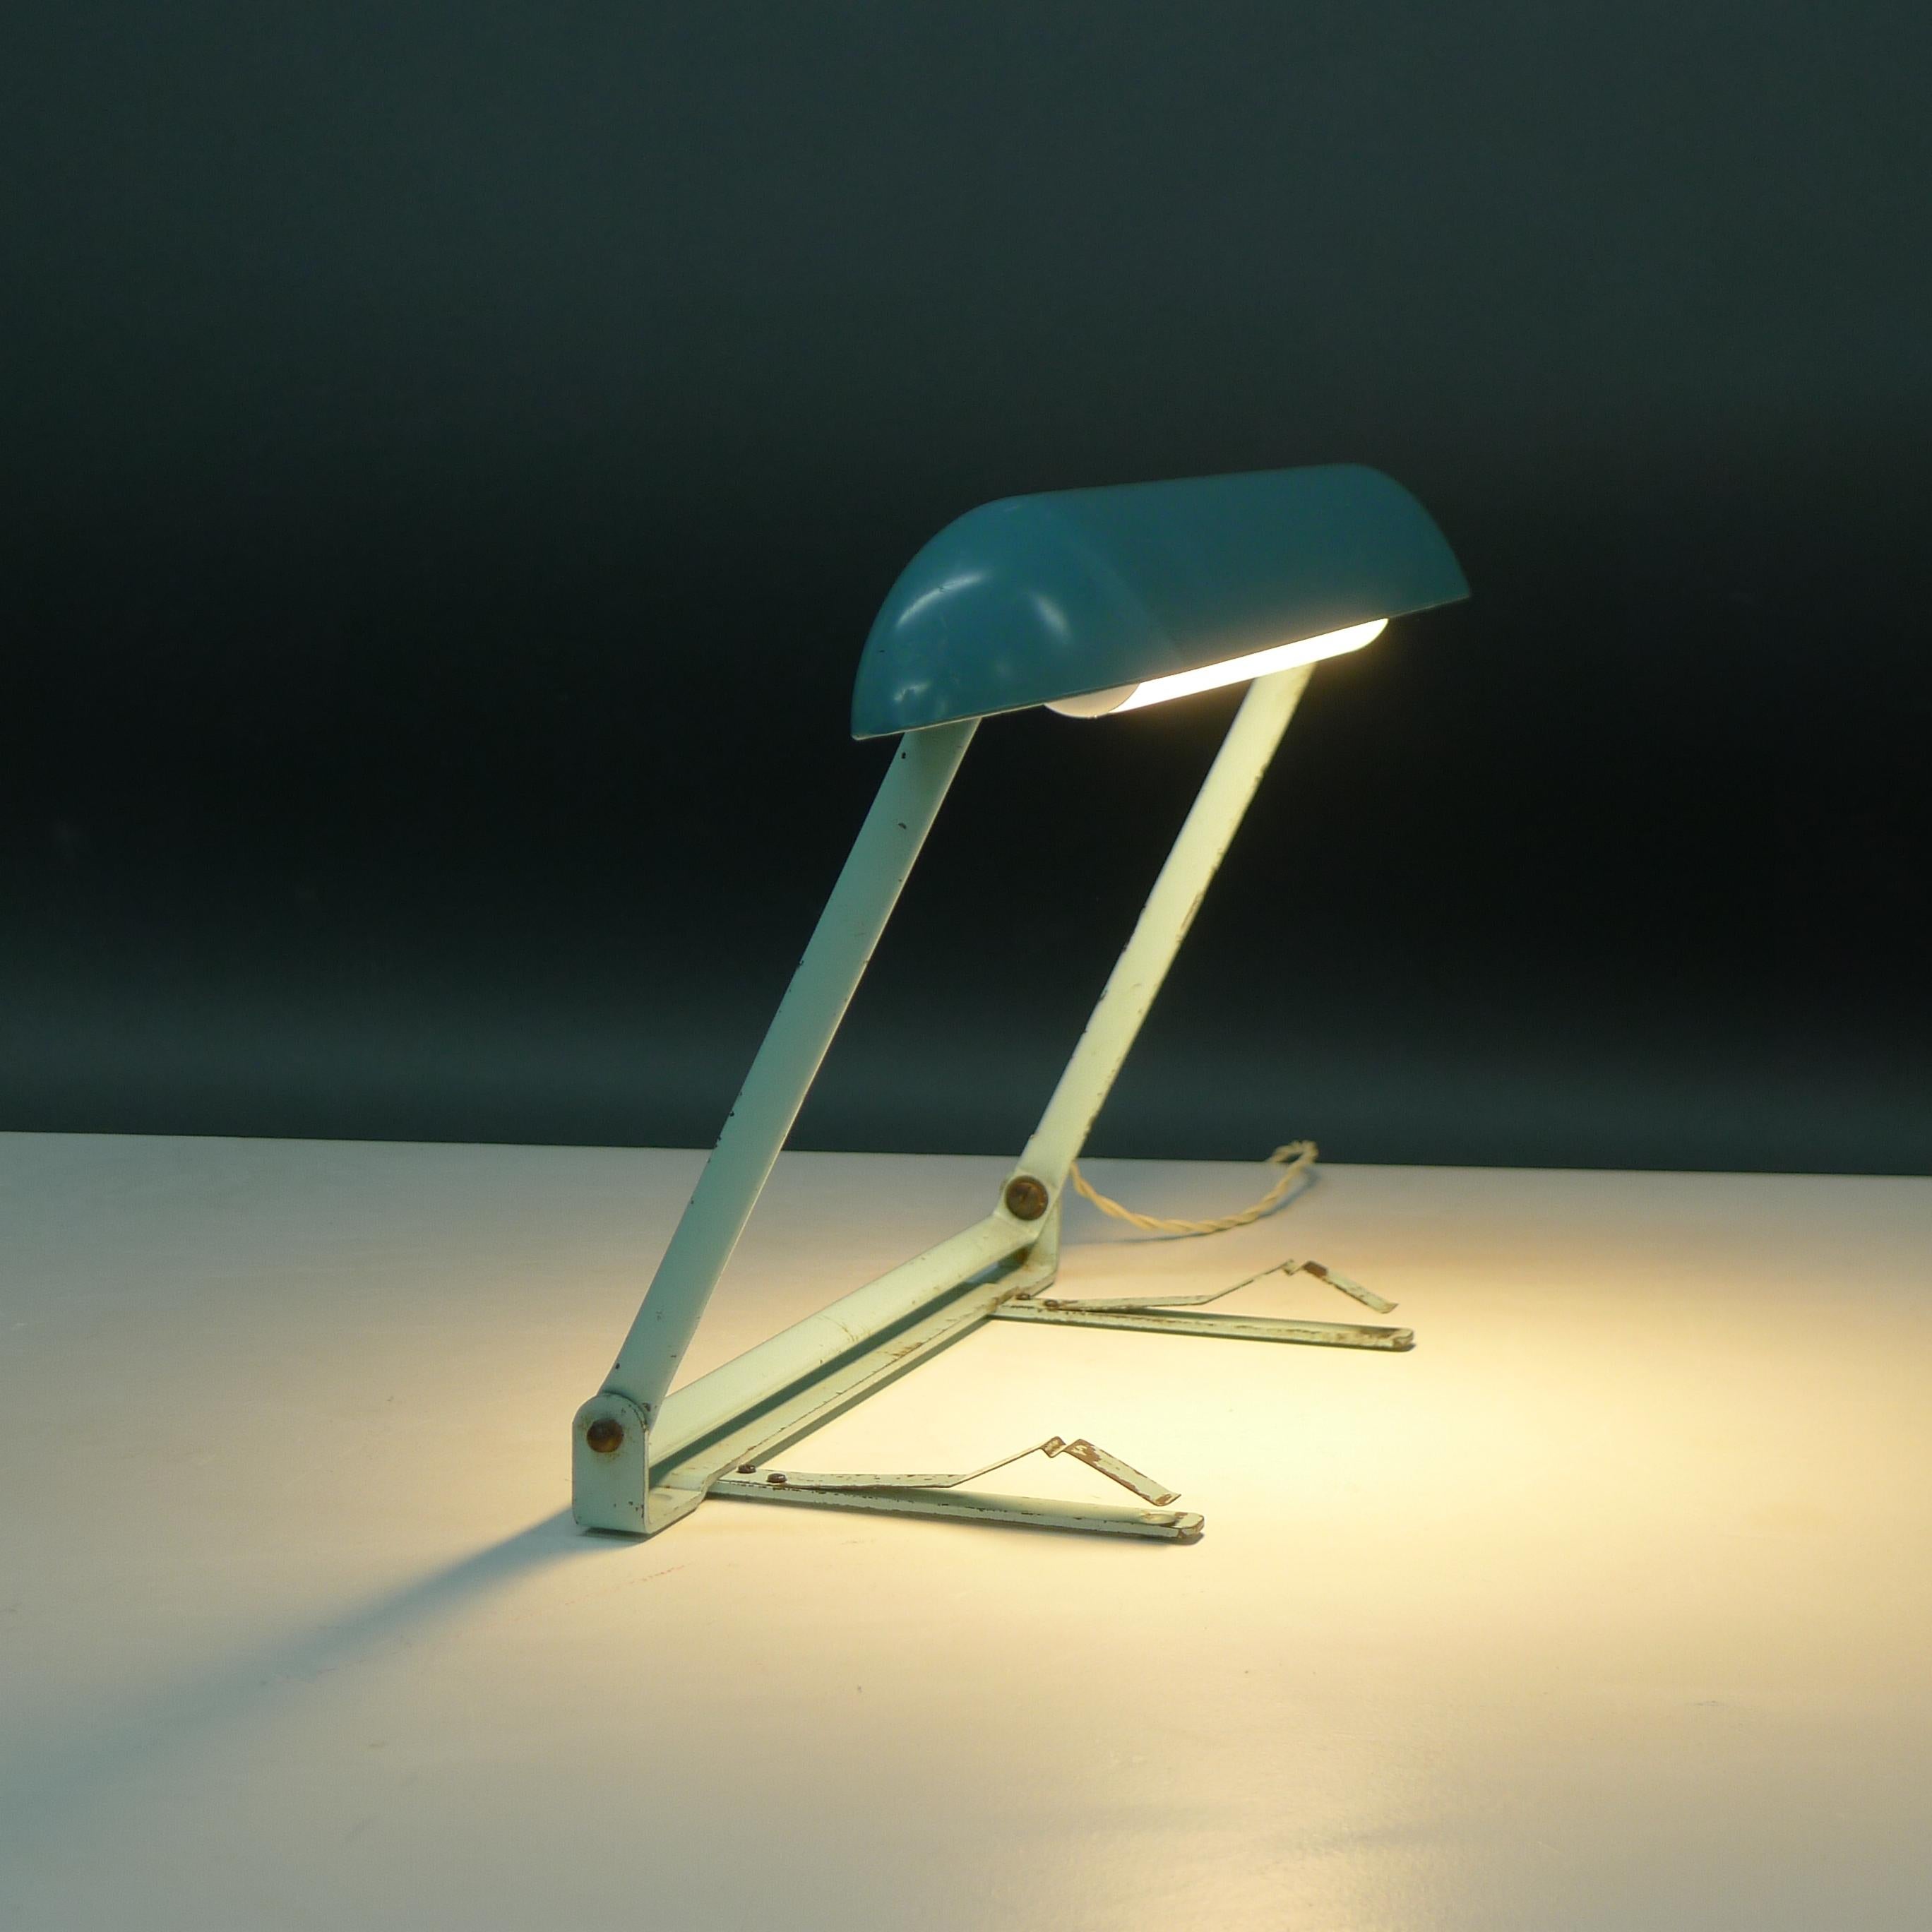 Philips Bakelite Desk Lamp, design attributed to Charlotte Perriand, 1950s For Sale 1